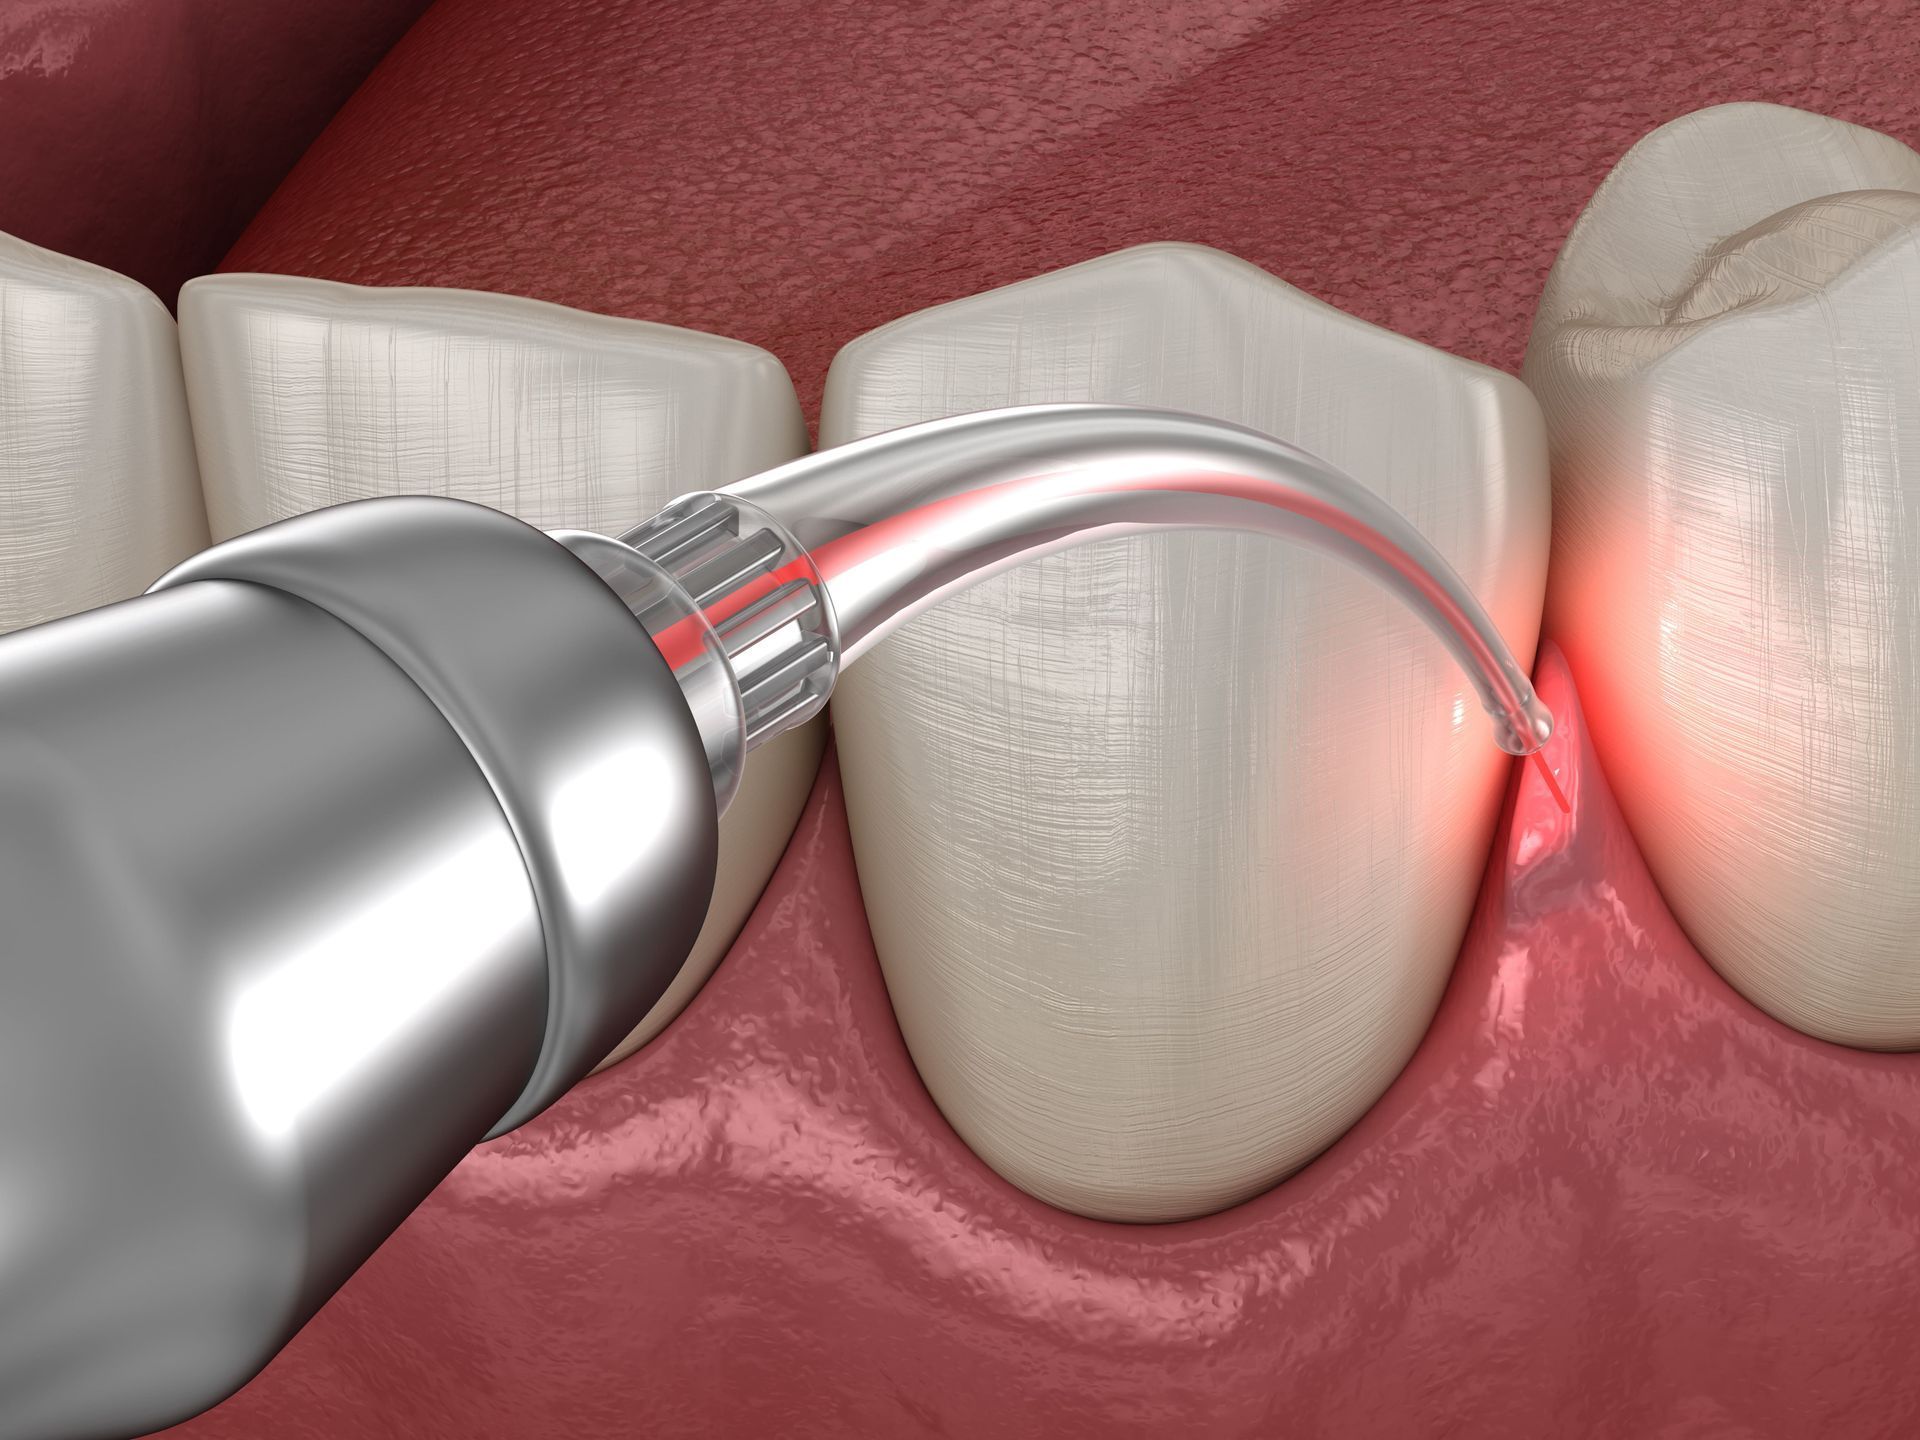 A computer generated image of a tooth and gums being treated by a laser